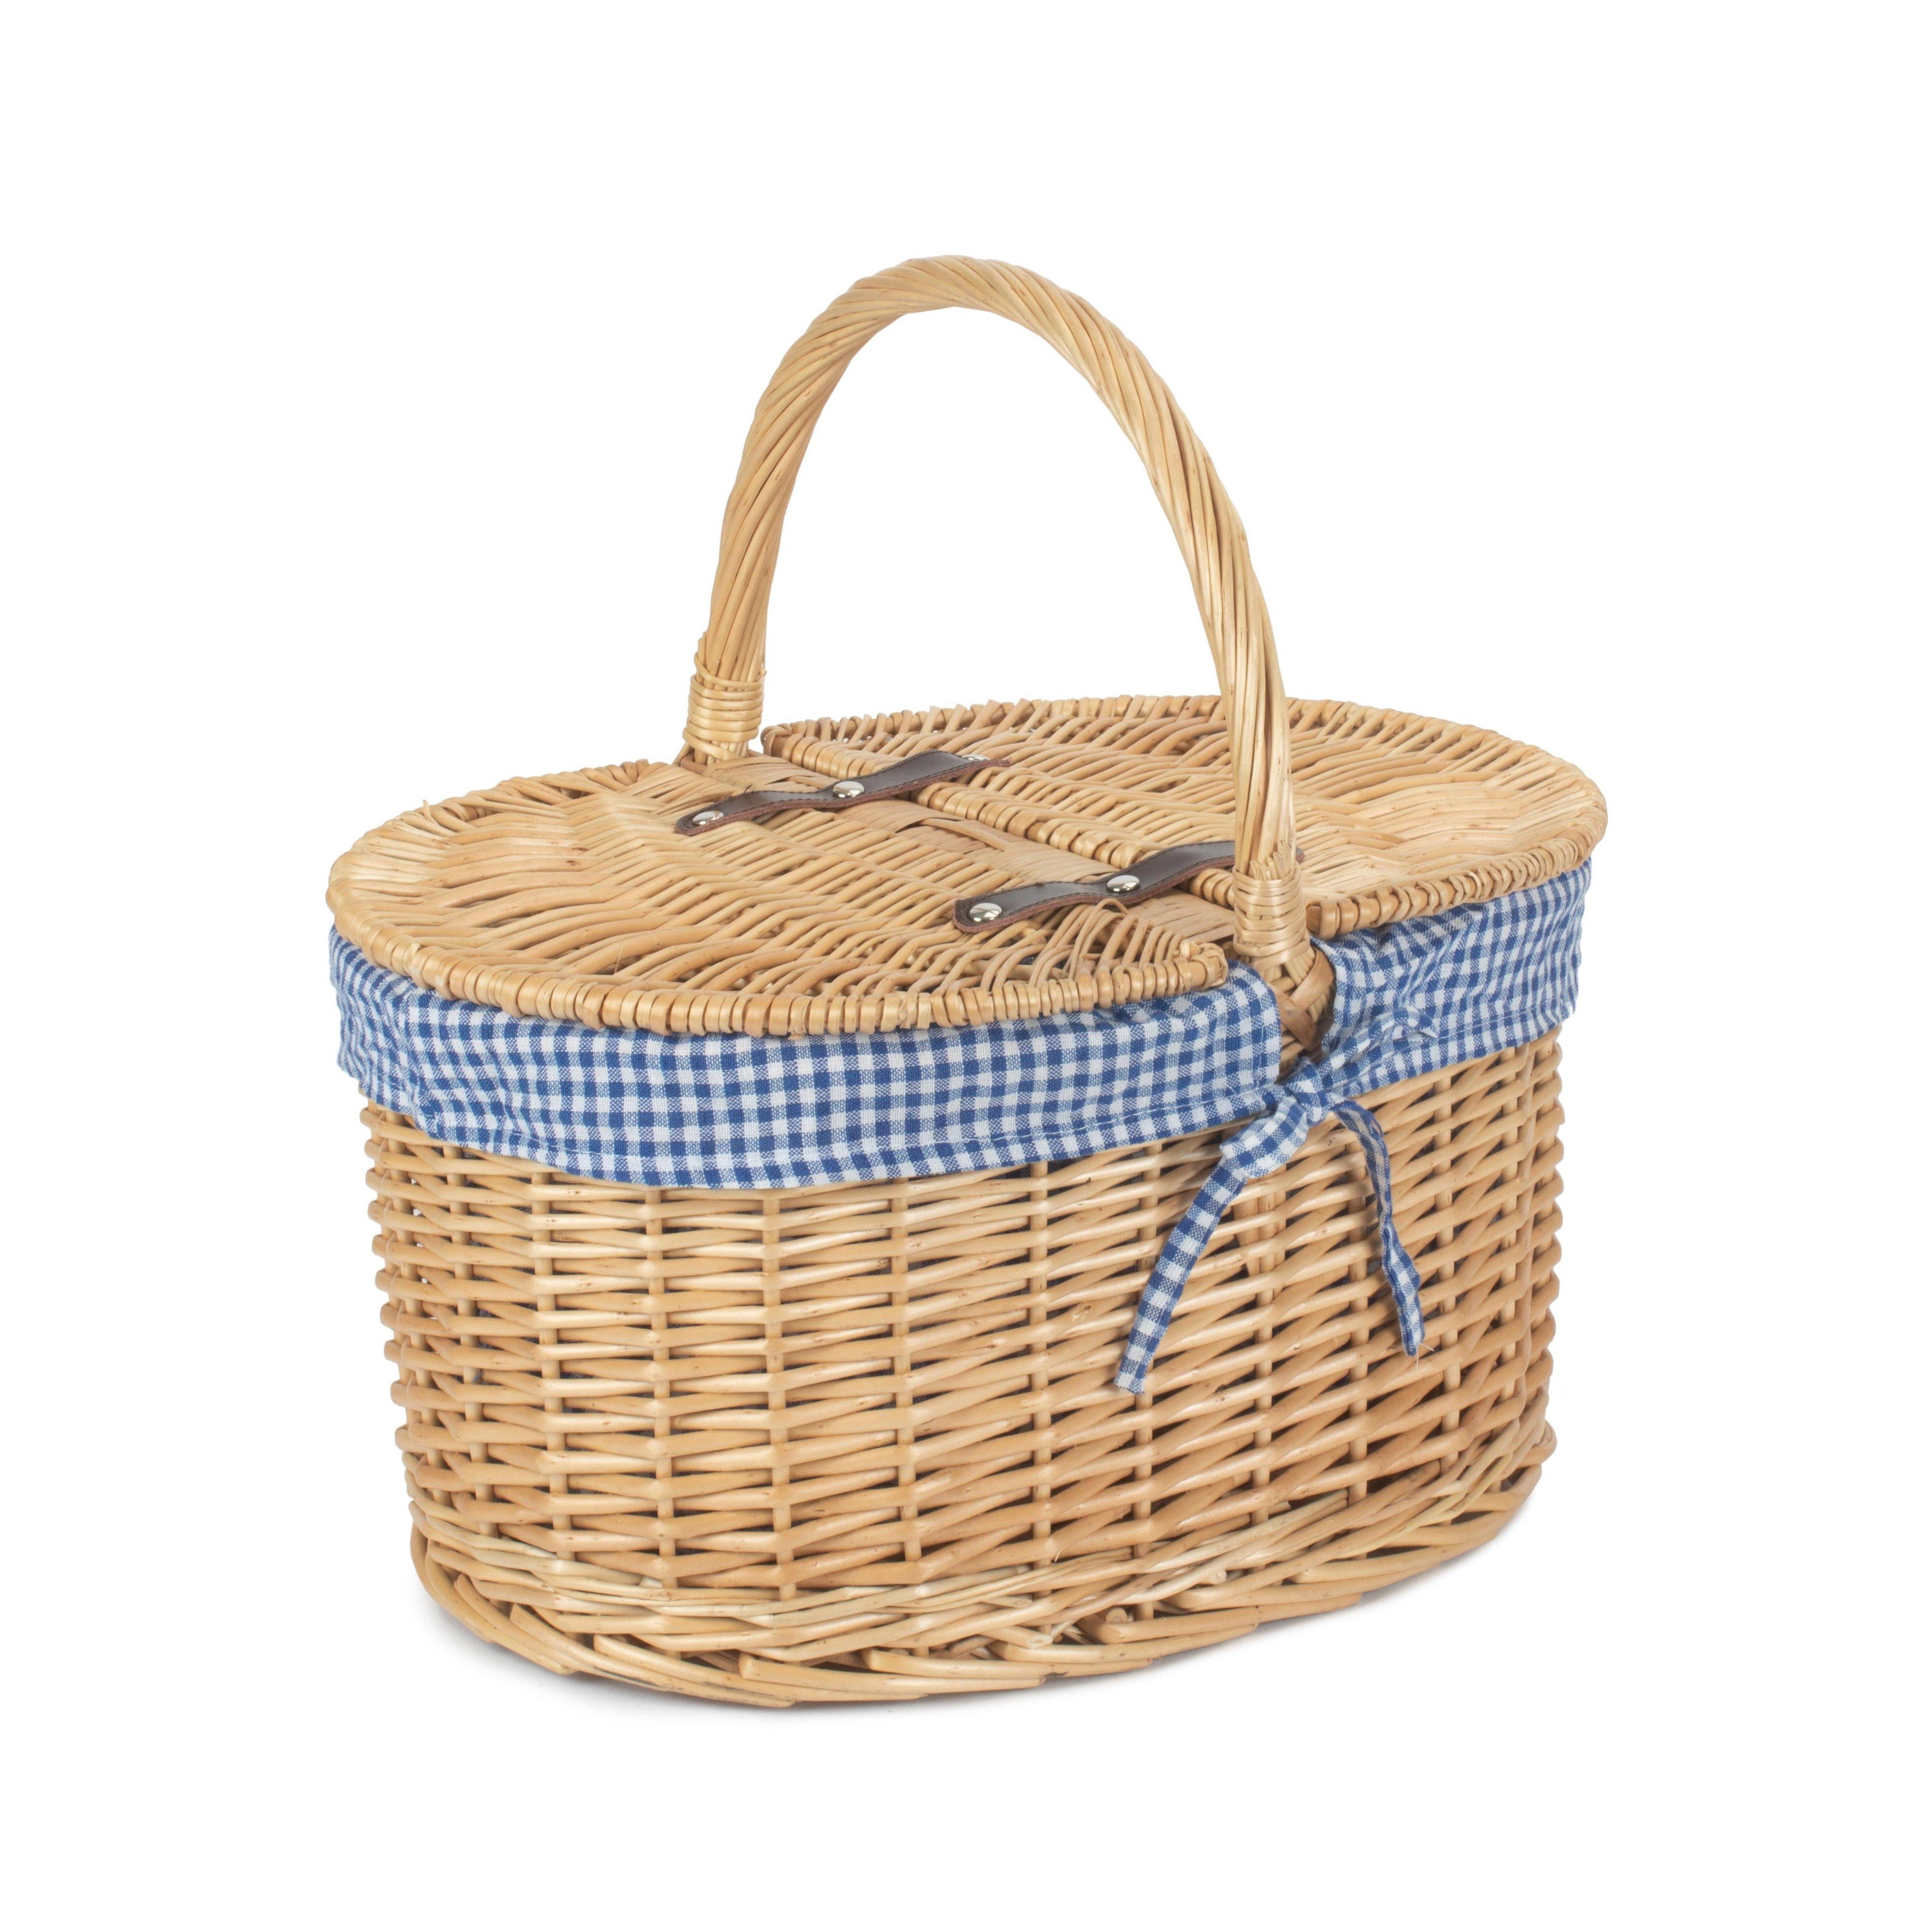 Wicker Blue Check Lining Oval Picnic Basket